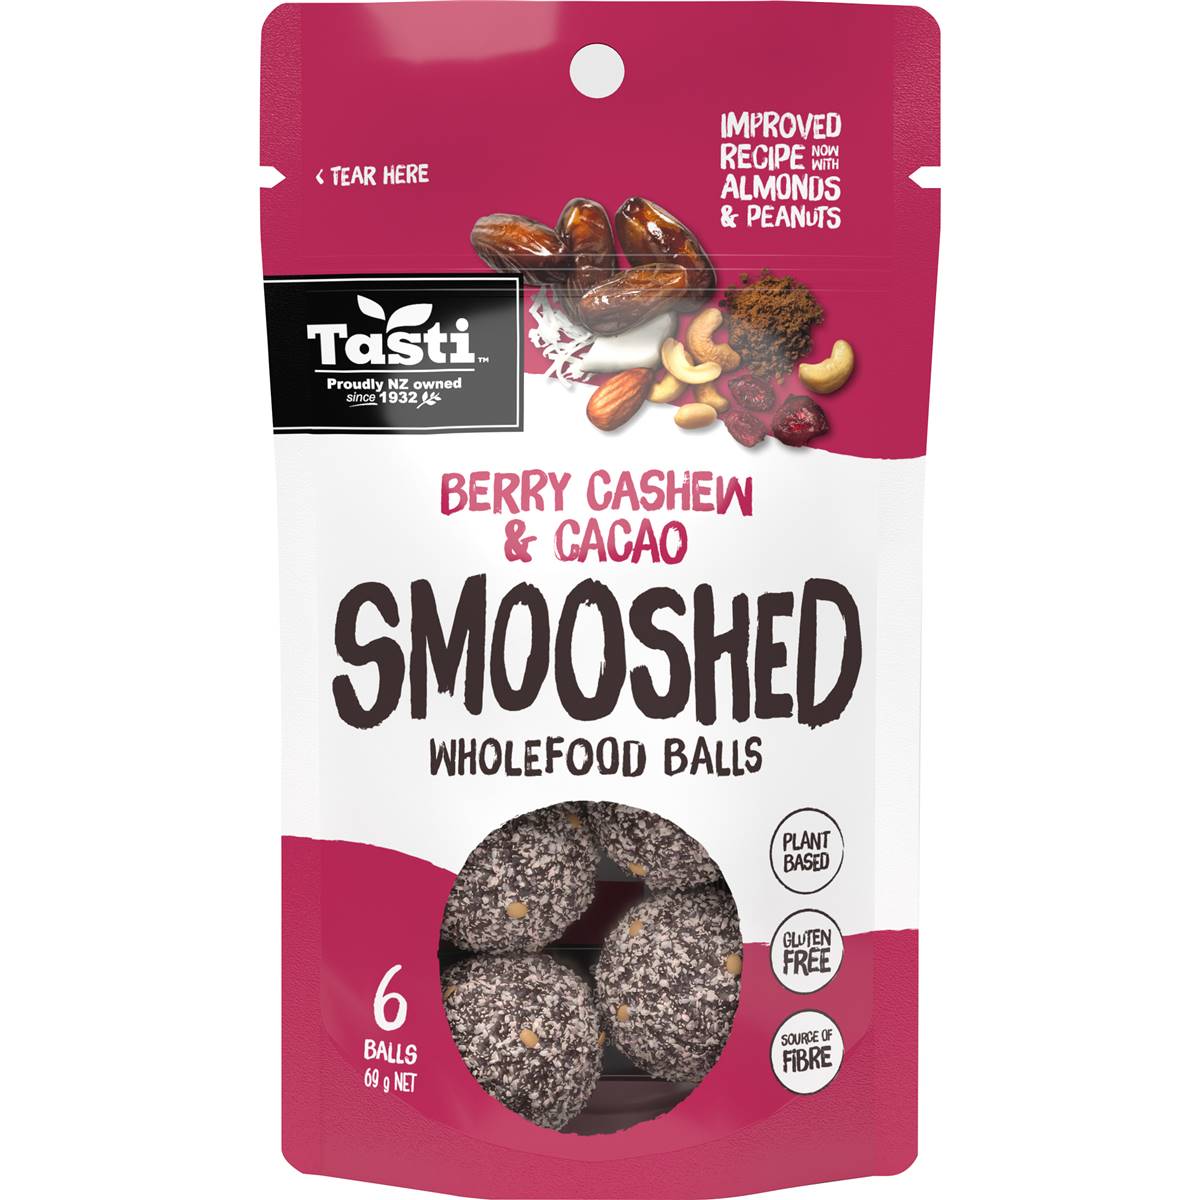 Calories in Tasti Smooshed Wholefood Balls Berry Cashew & Cacao